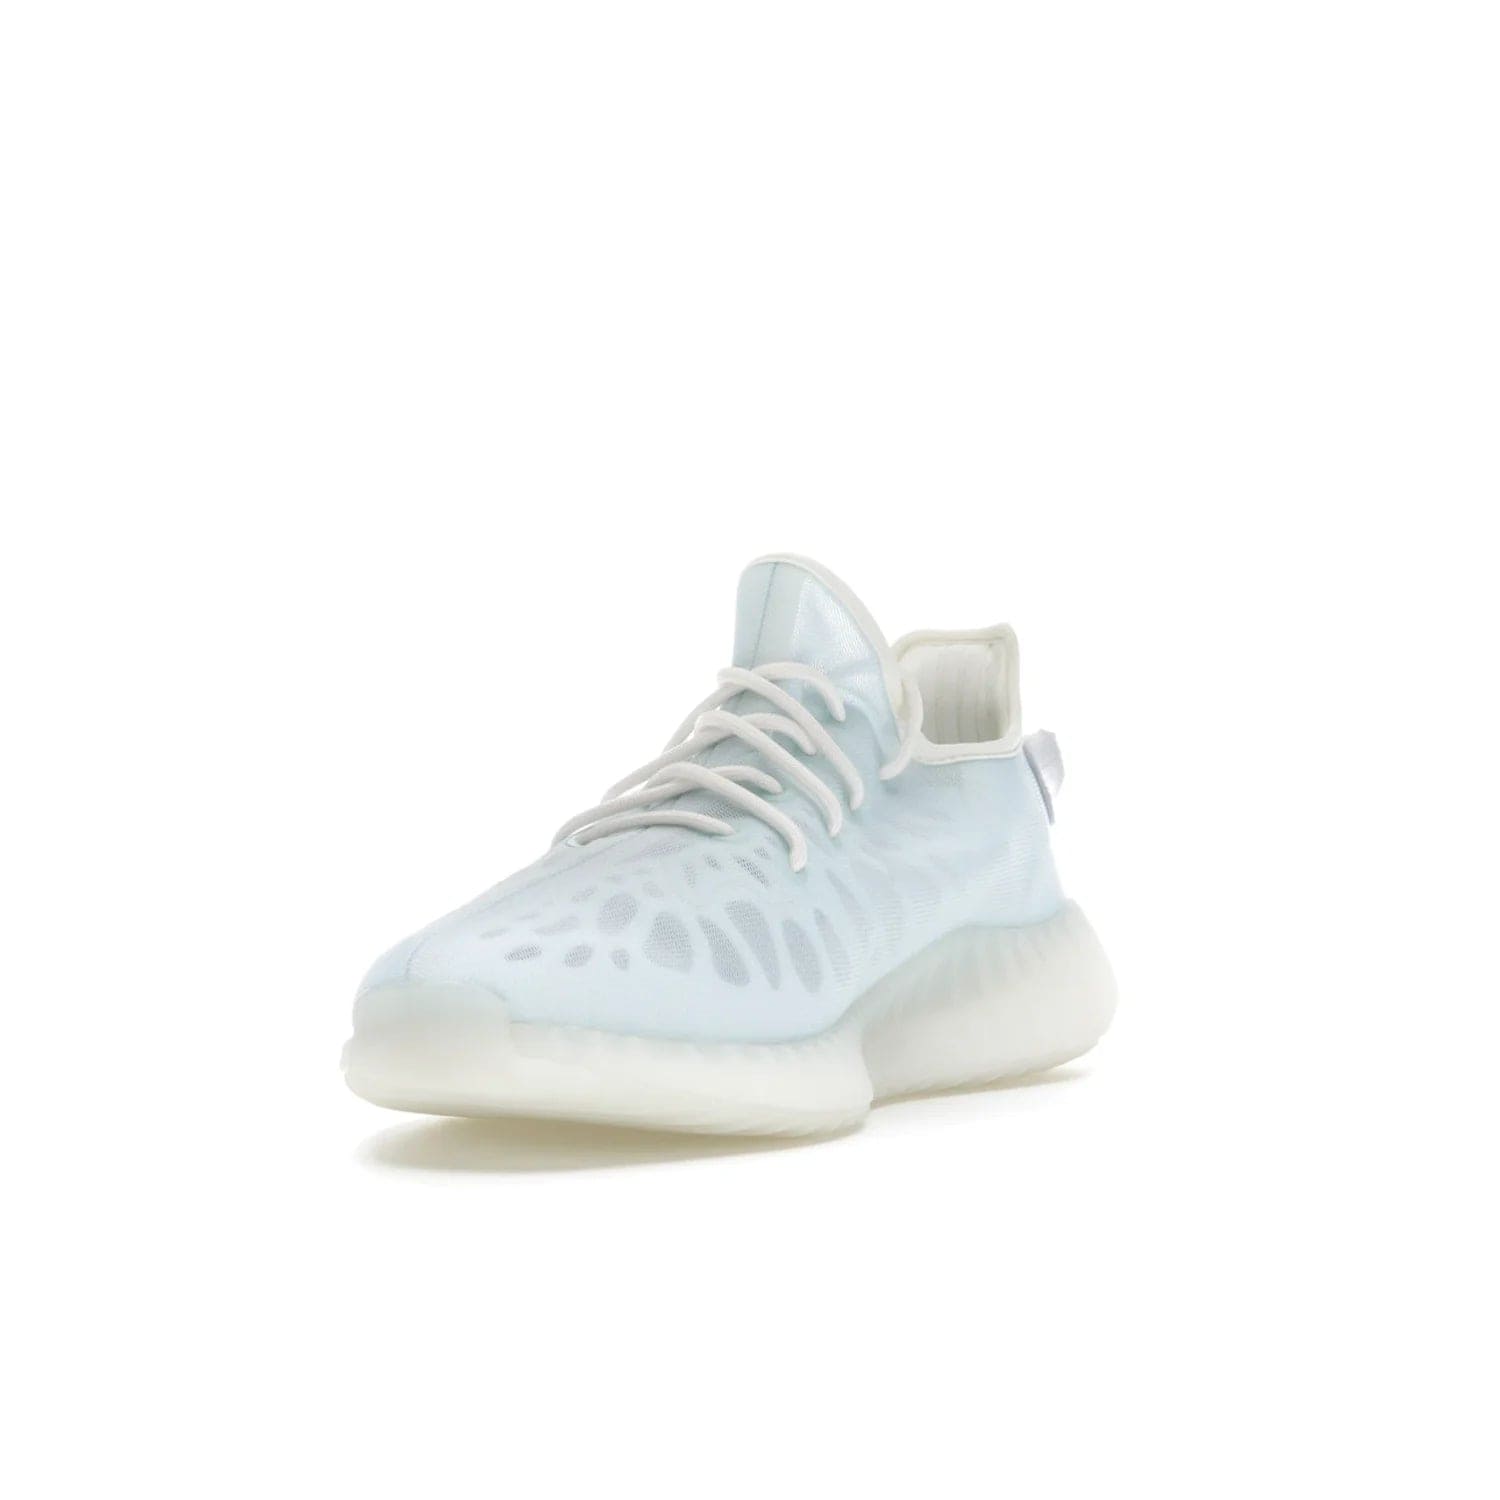 adidas Yeezy Boost 350 V2 Mono Ice - Image 13 - Only at www.BallersClubKickz.com - Introducing the adidas Yeezy 350 V2 Mono Ice - a sleek monofilament mesh design in Ice blue with Boost sole and heel pull tab. Released exclusively in the US for $220.